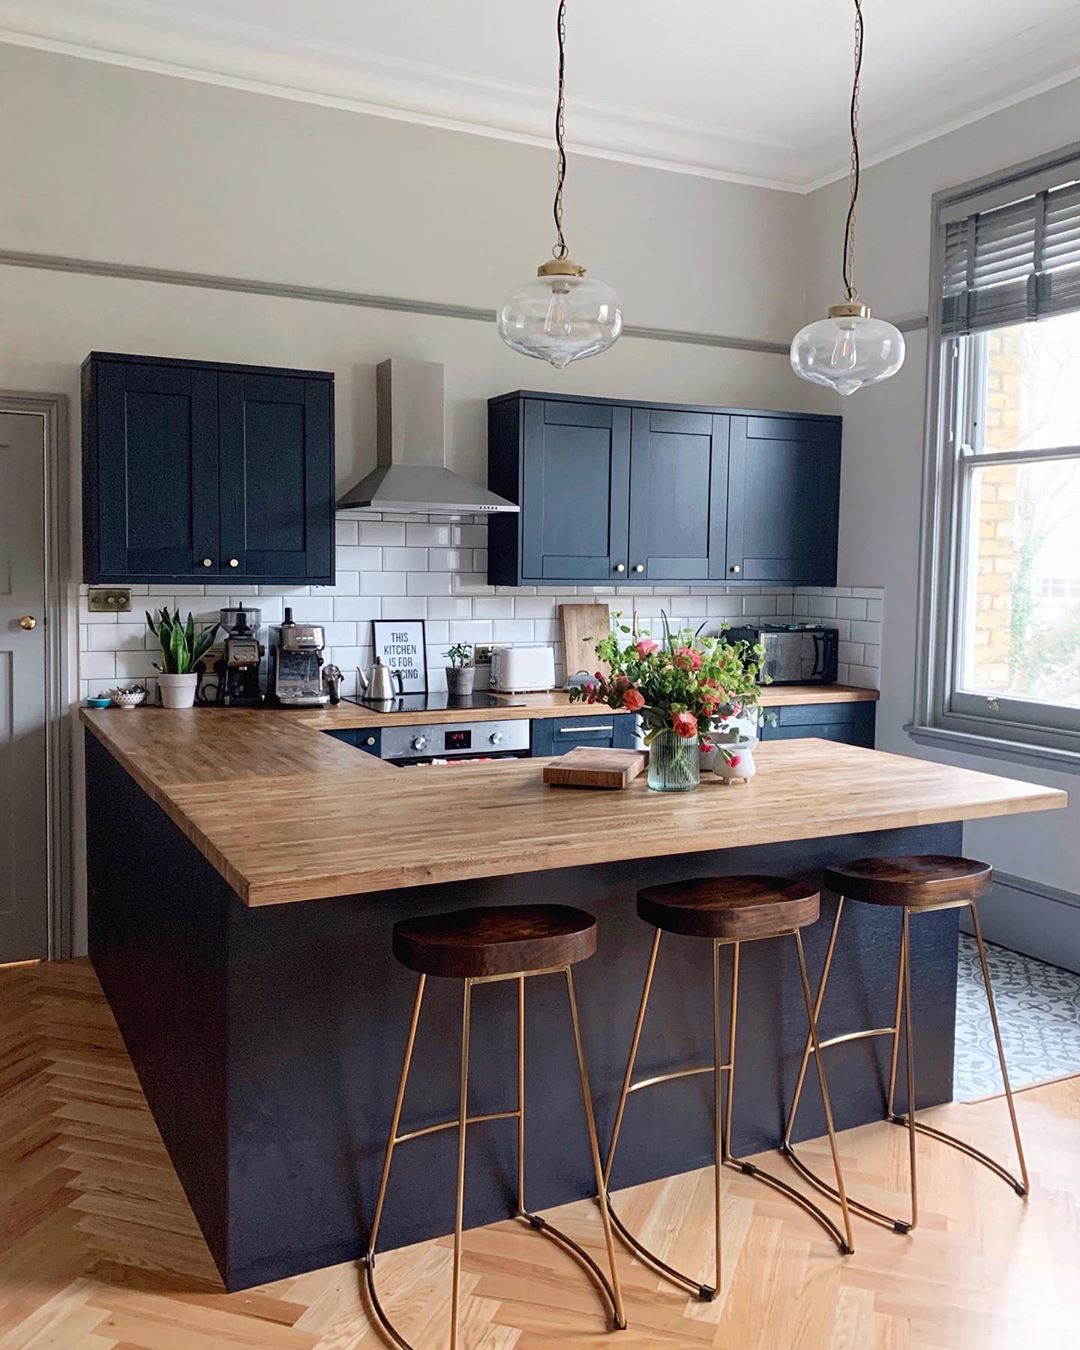 Modern kitchen with breakfast bar island. Photo by Instagram user @dustsheets_and_decor